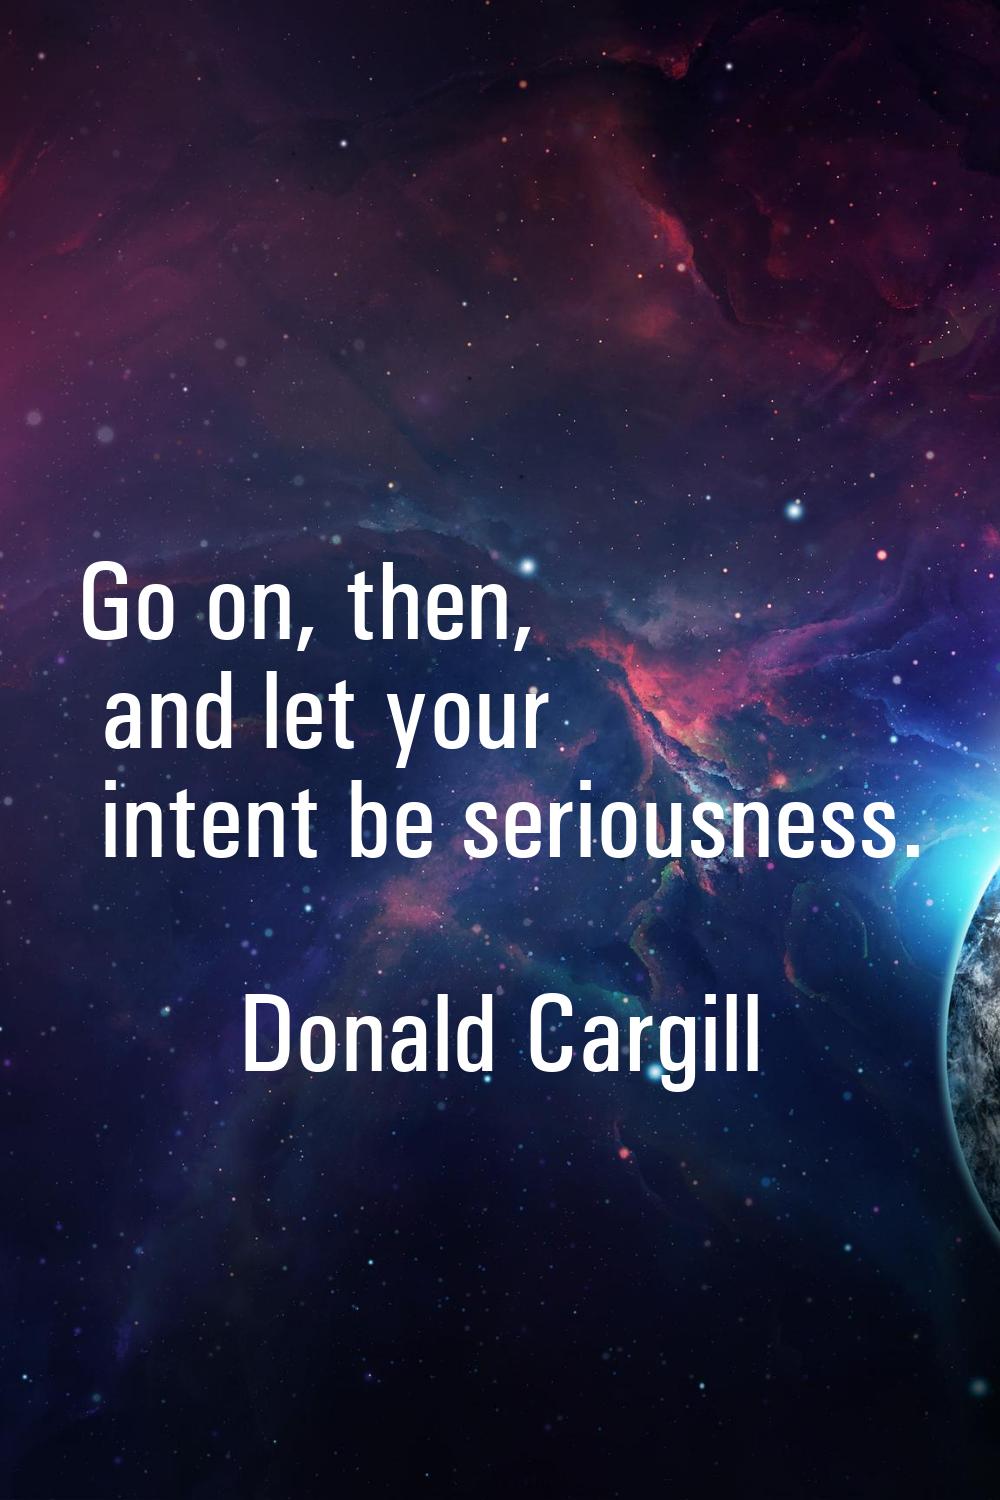 Go on, then, and let your intent be seriousness.